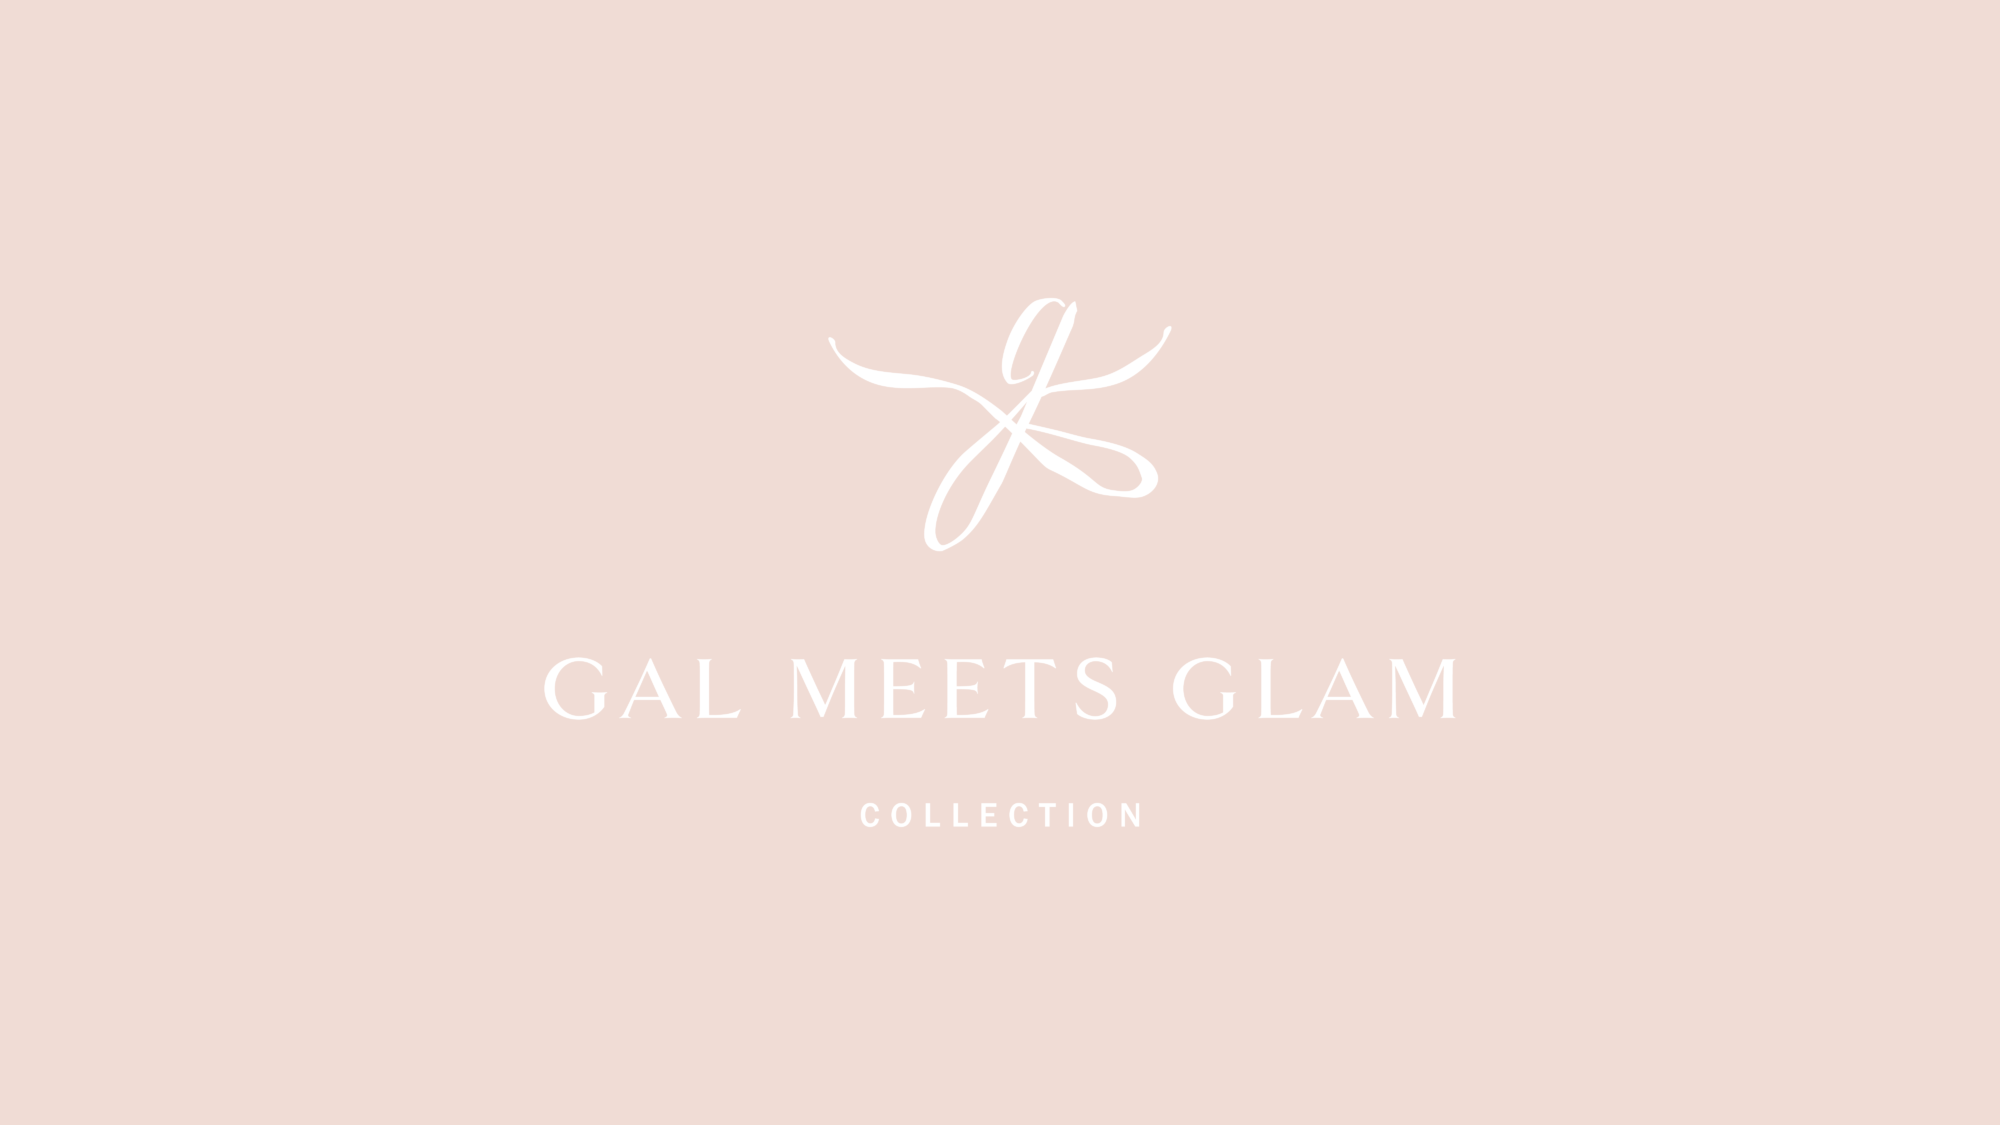 Our NYE Spent in NYC - Gal Meets Glam